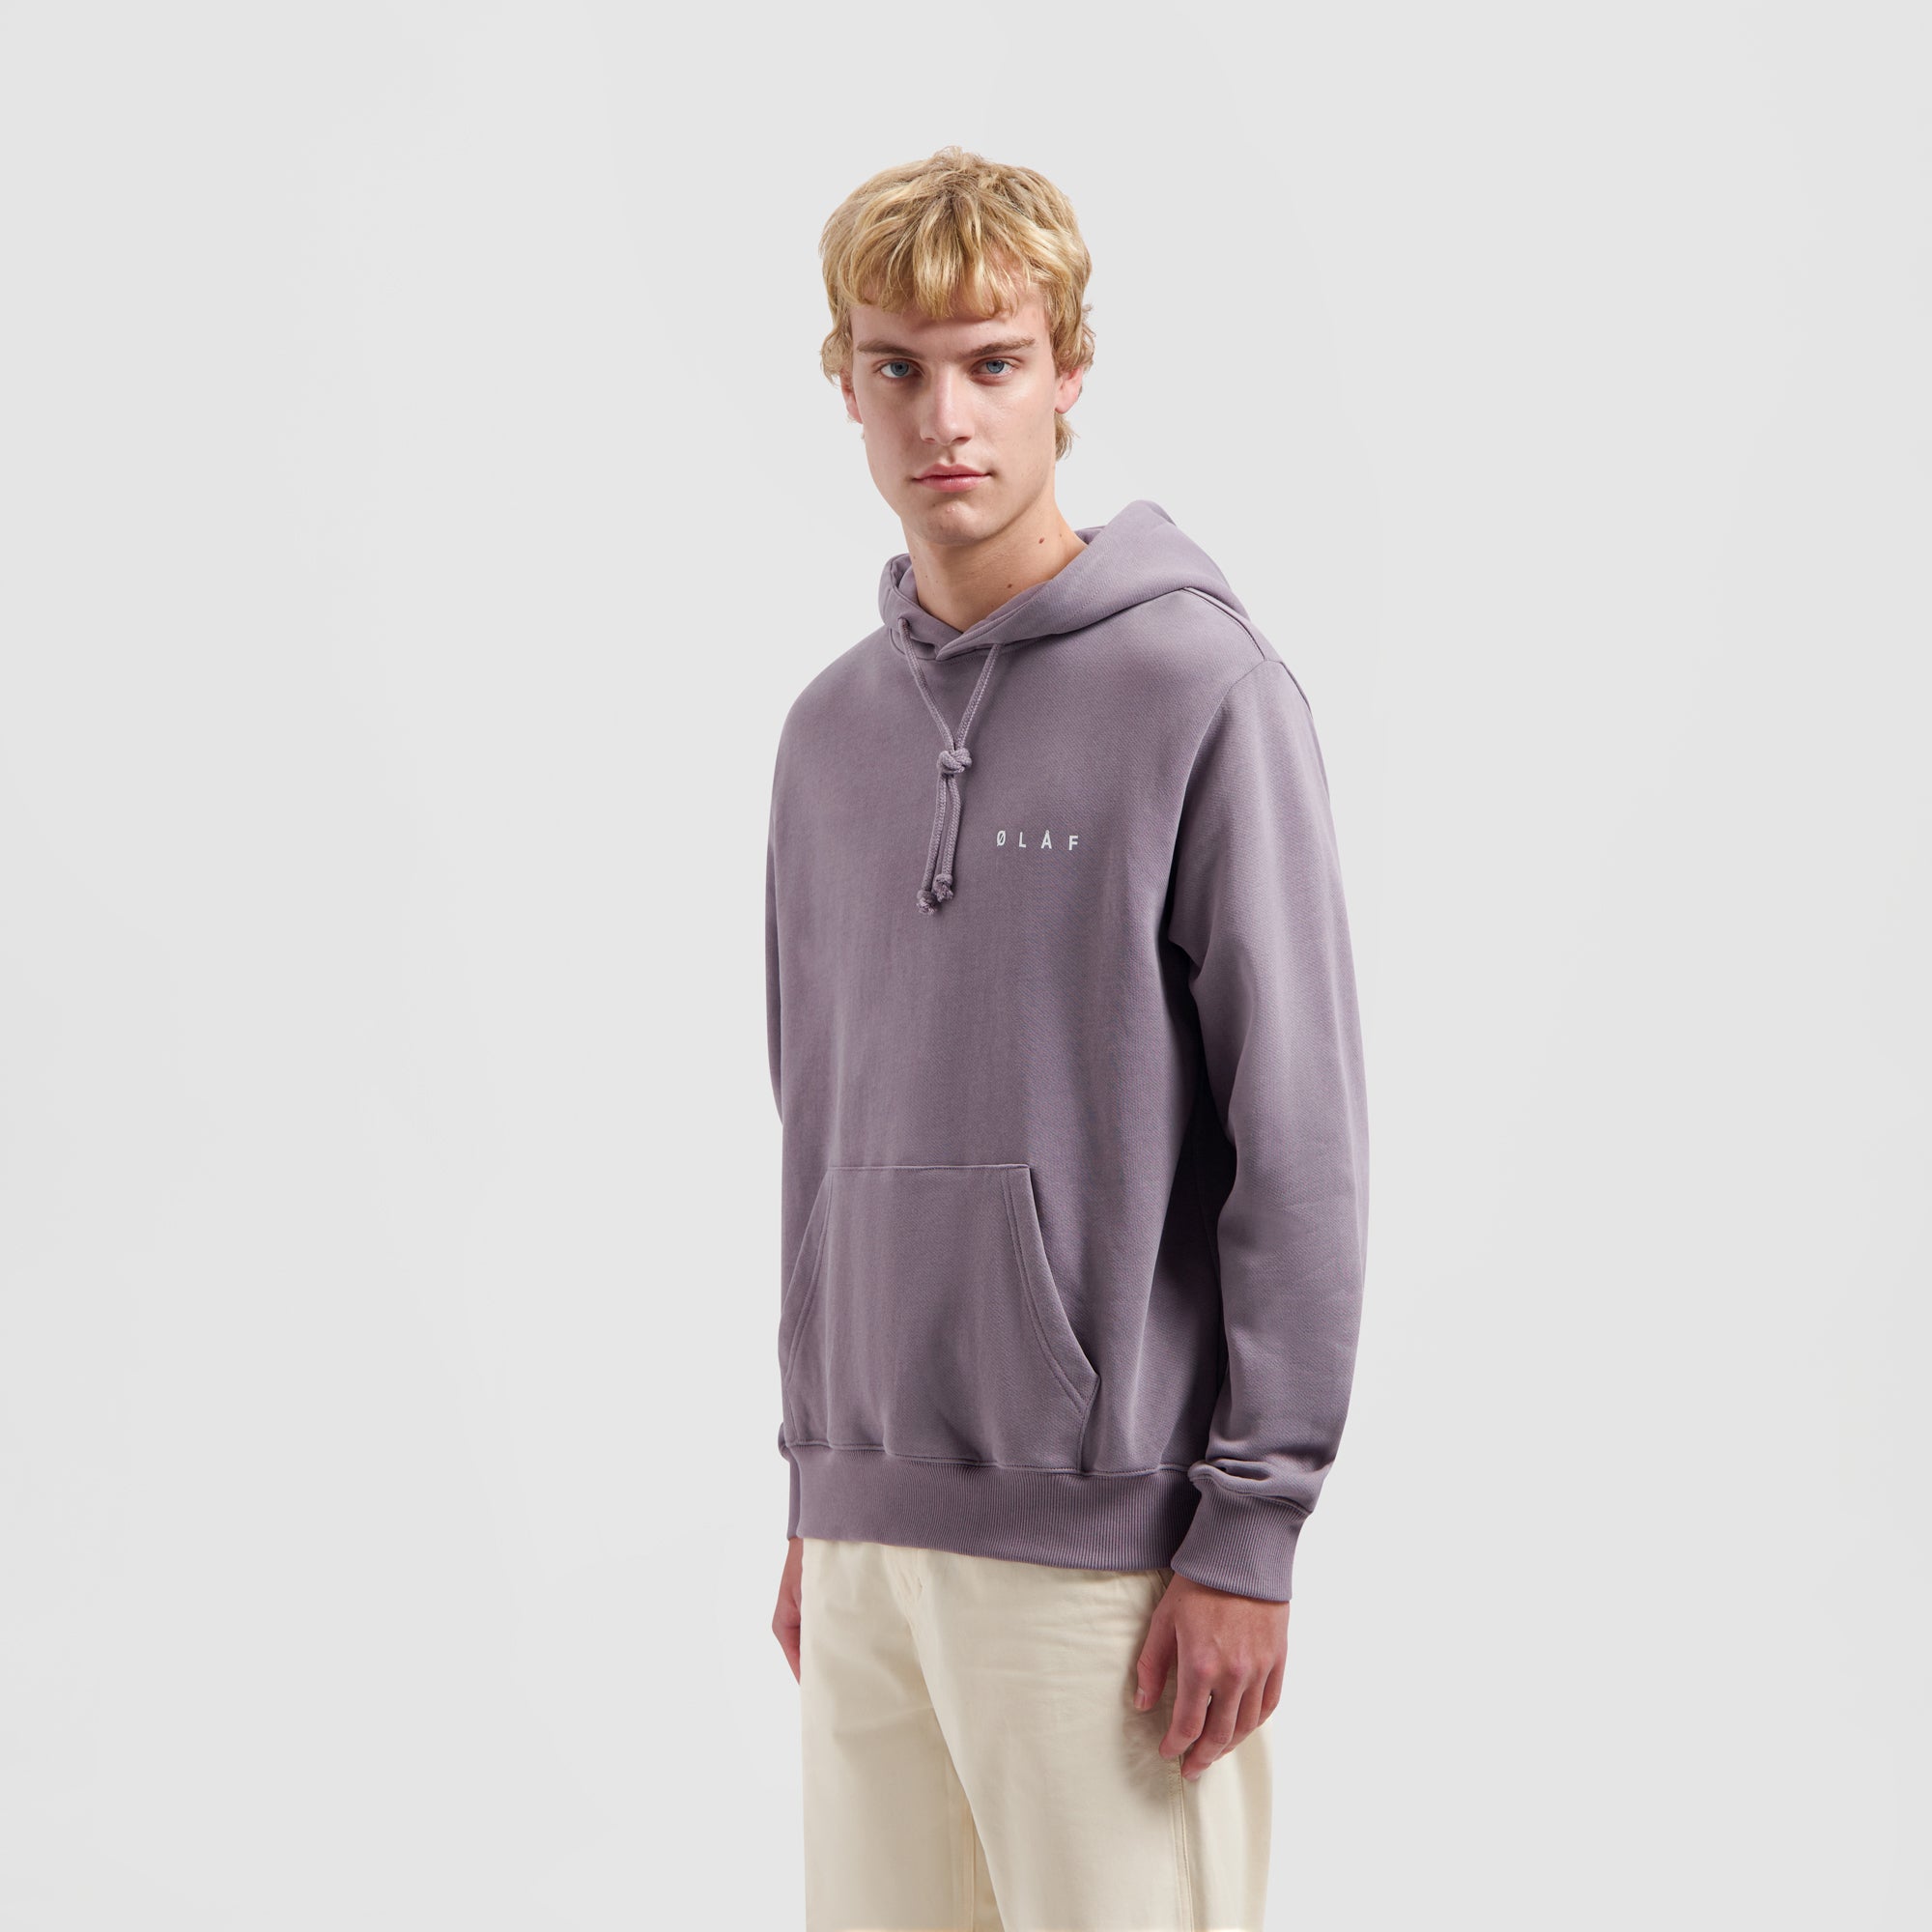 Pixelated Face Hoodie - Stone Grey